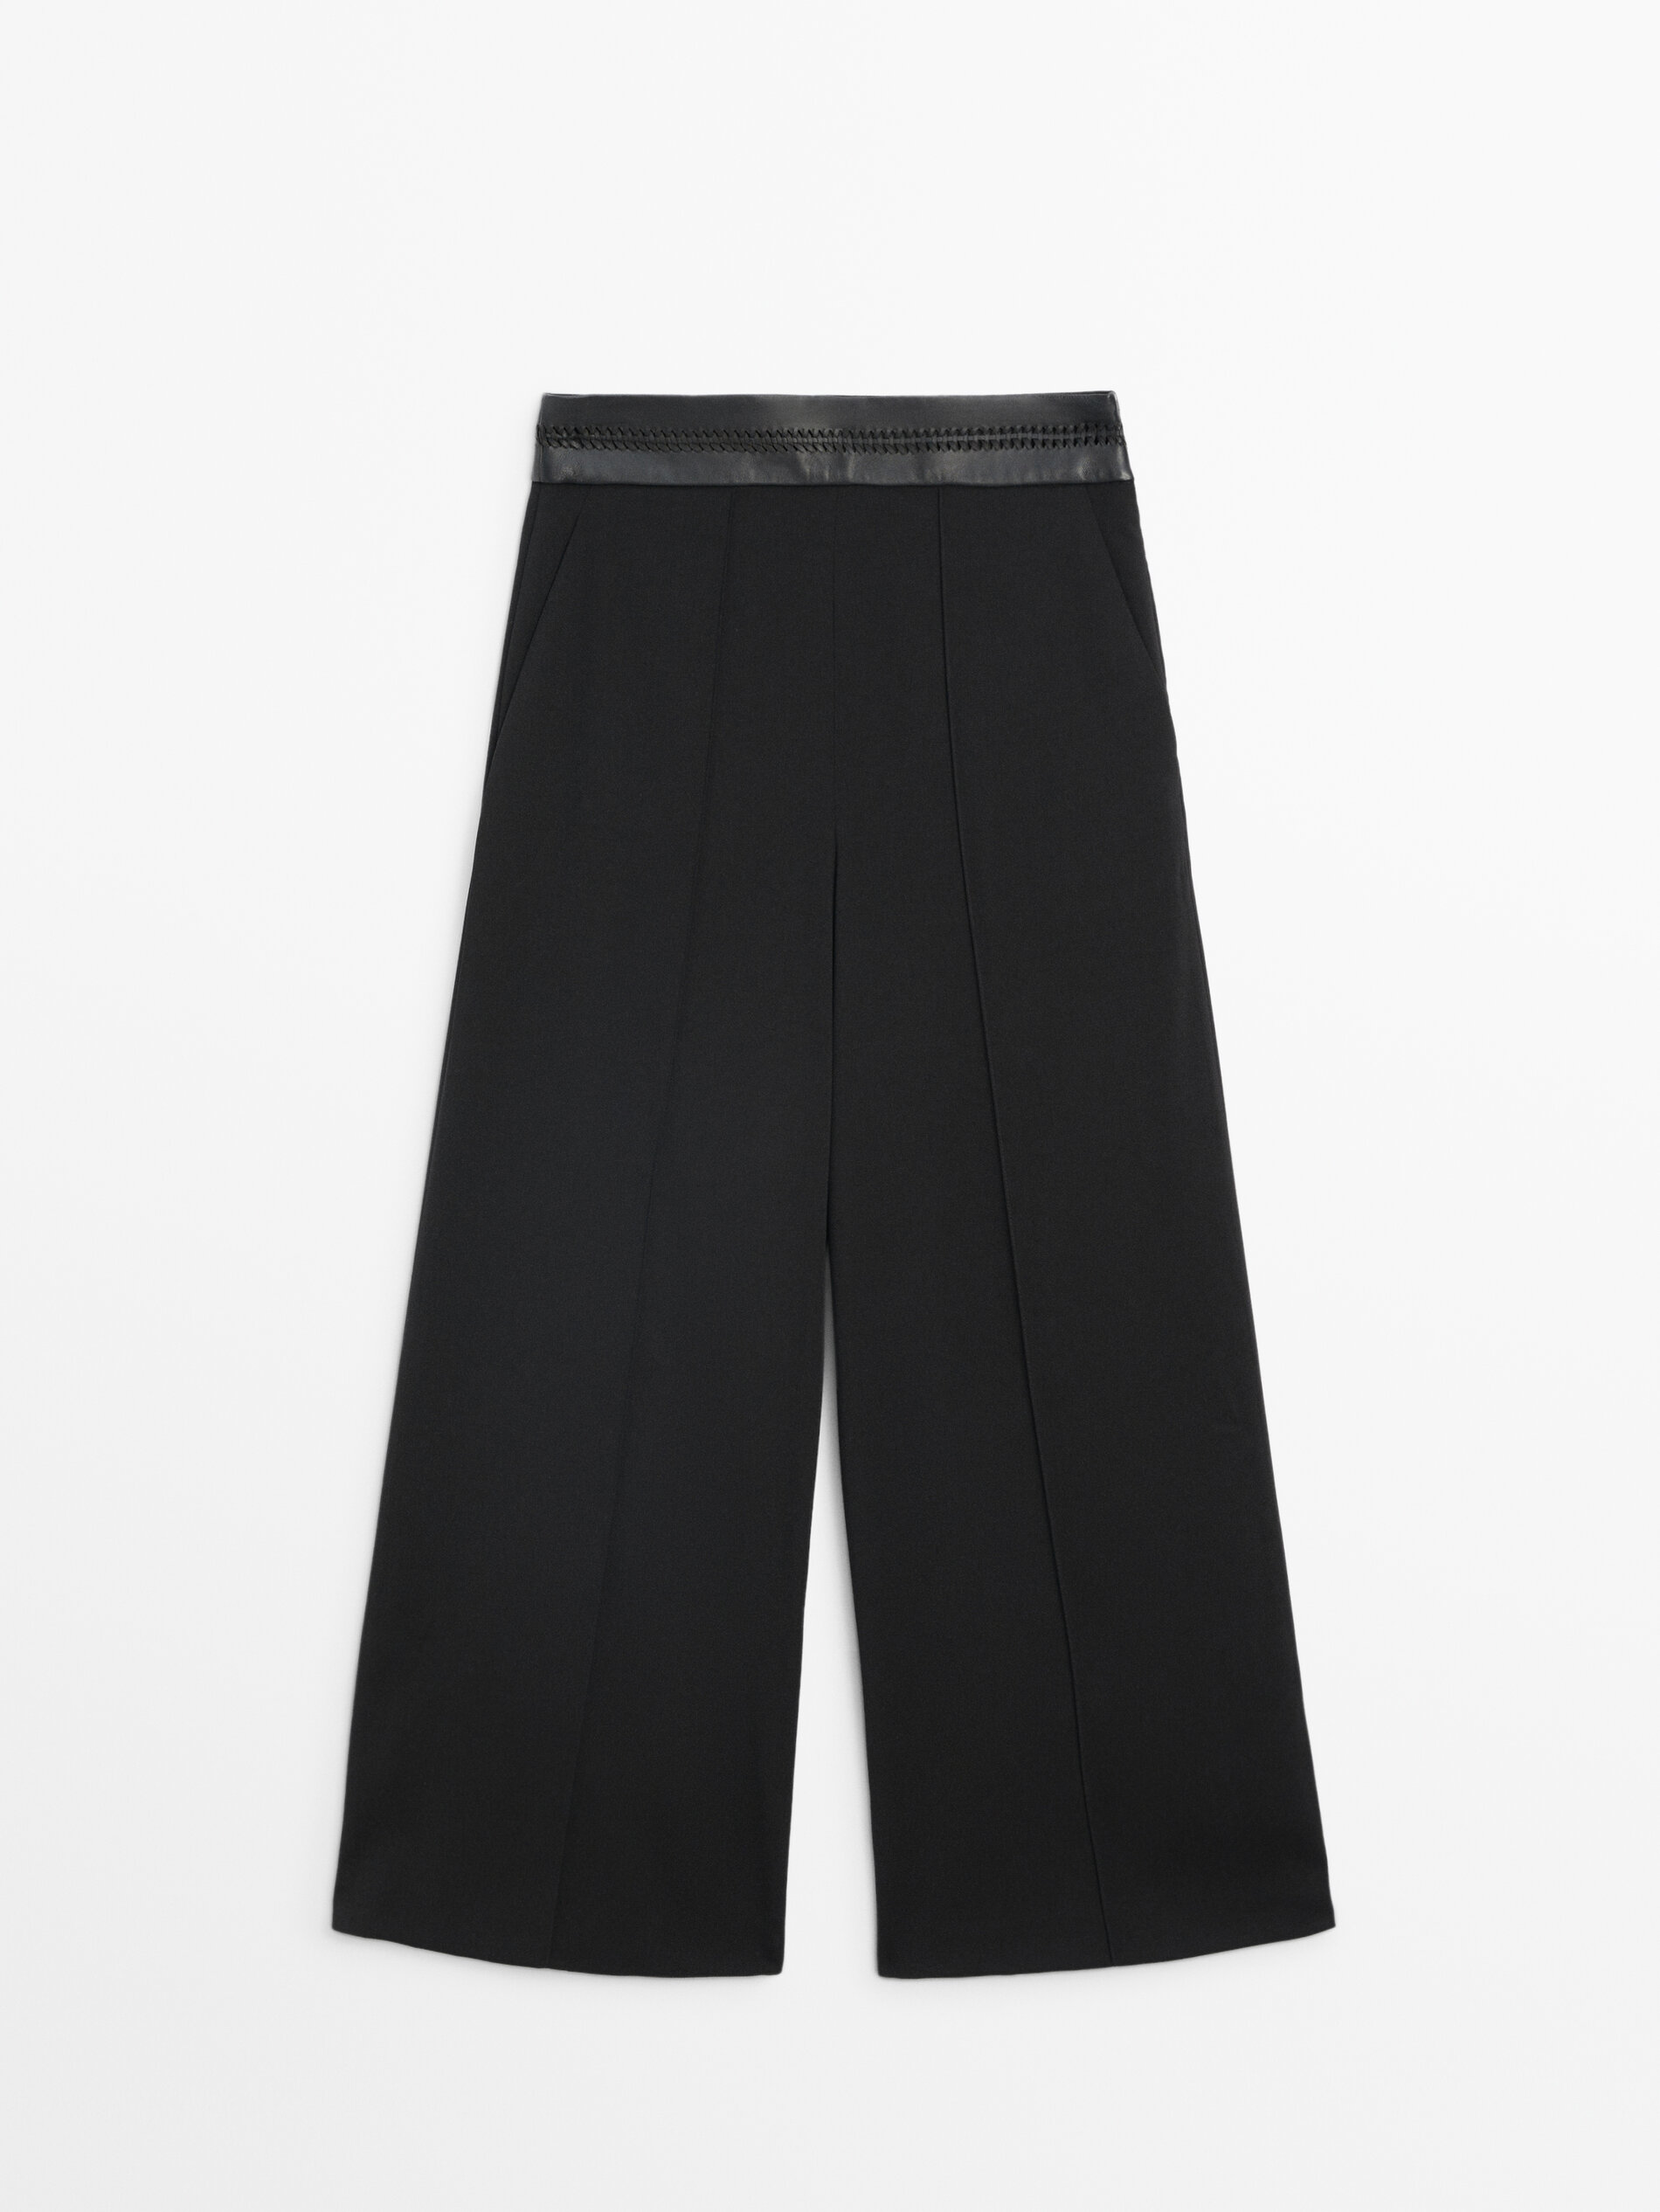 Black culottes with die-cut leather detail